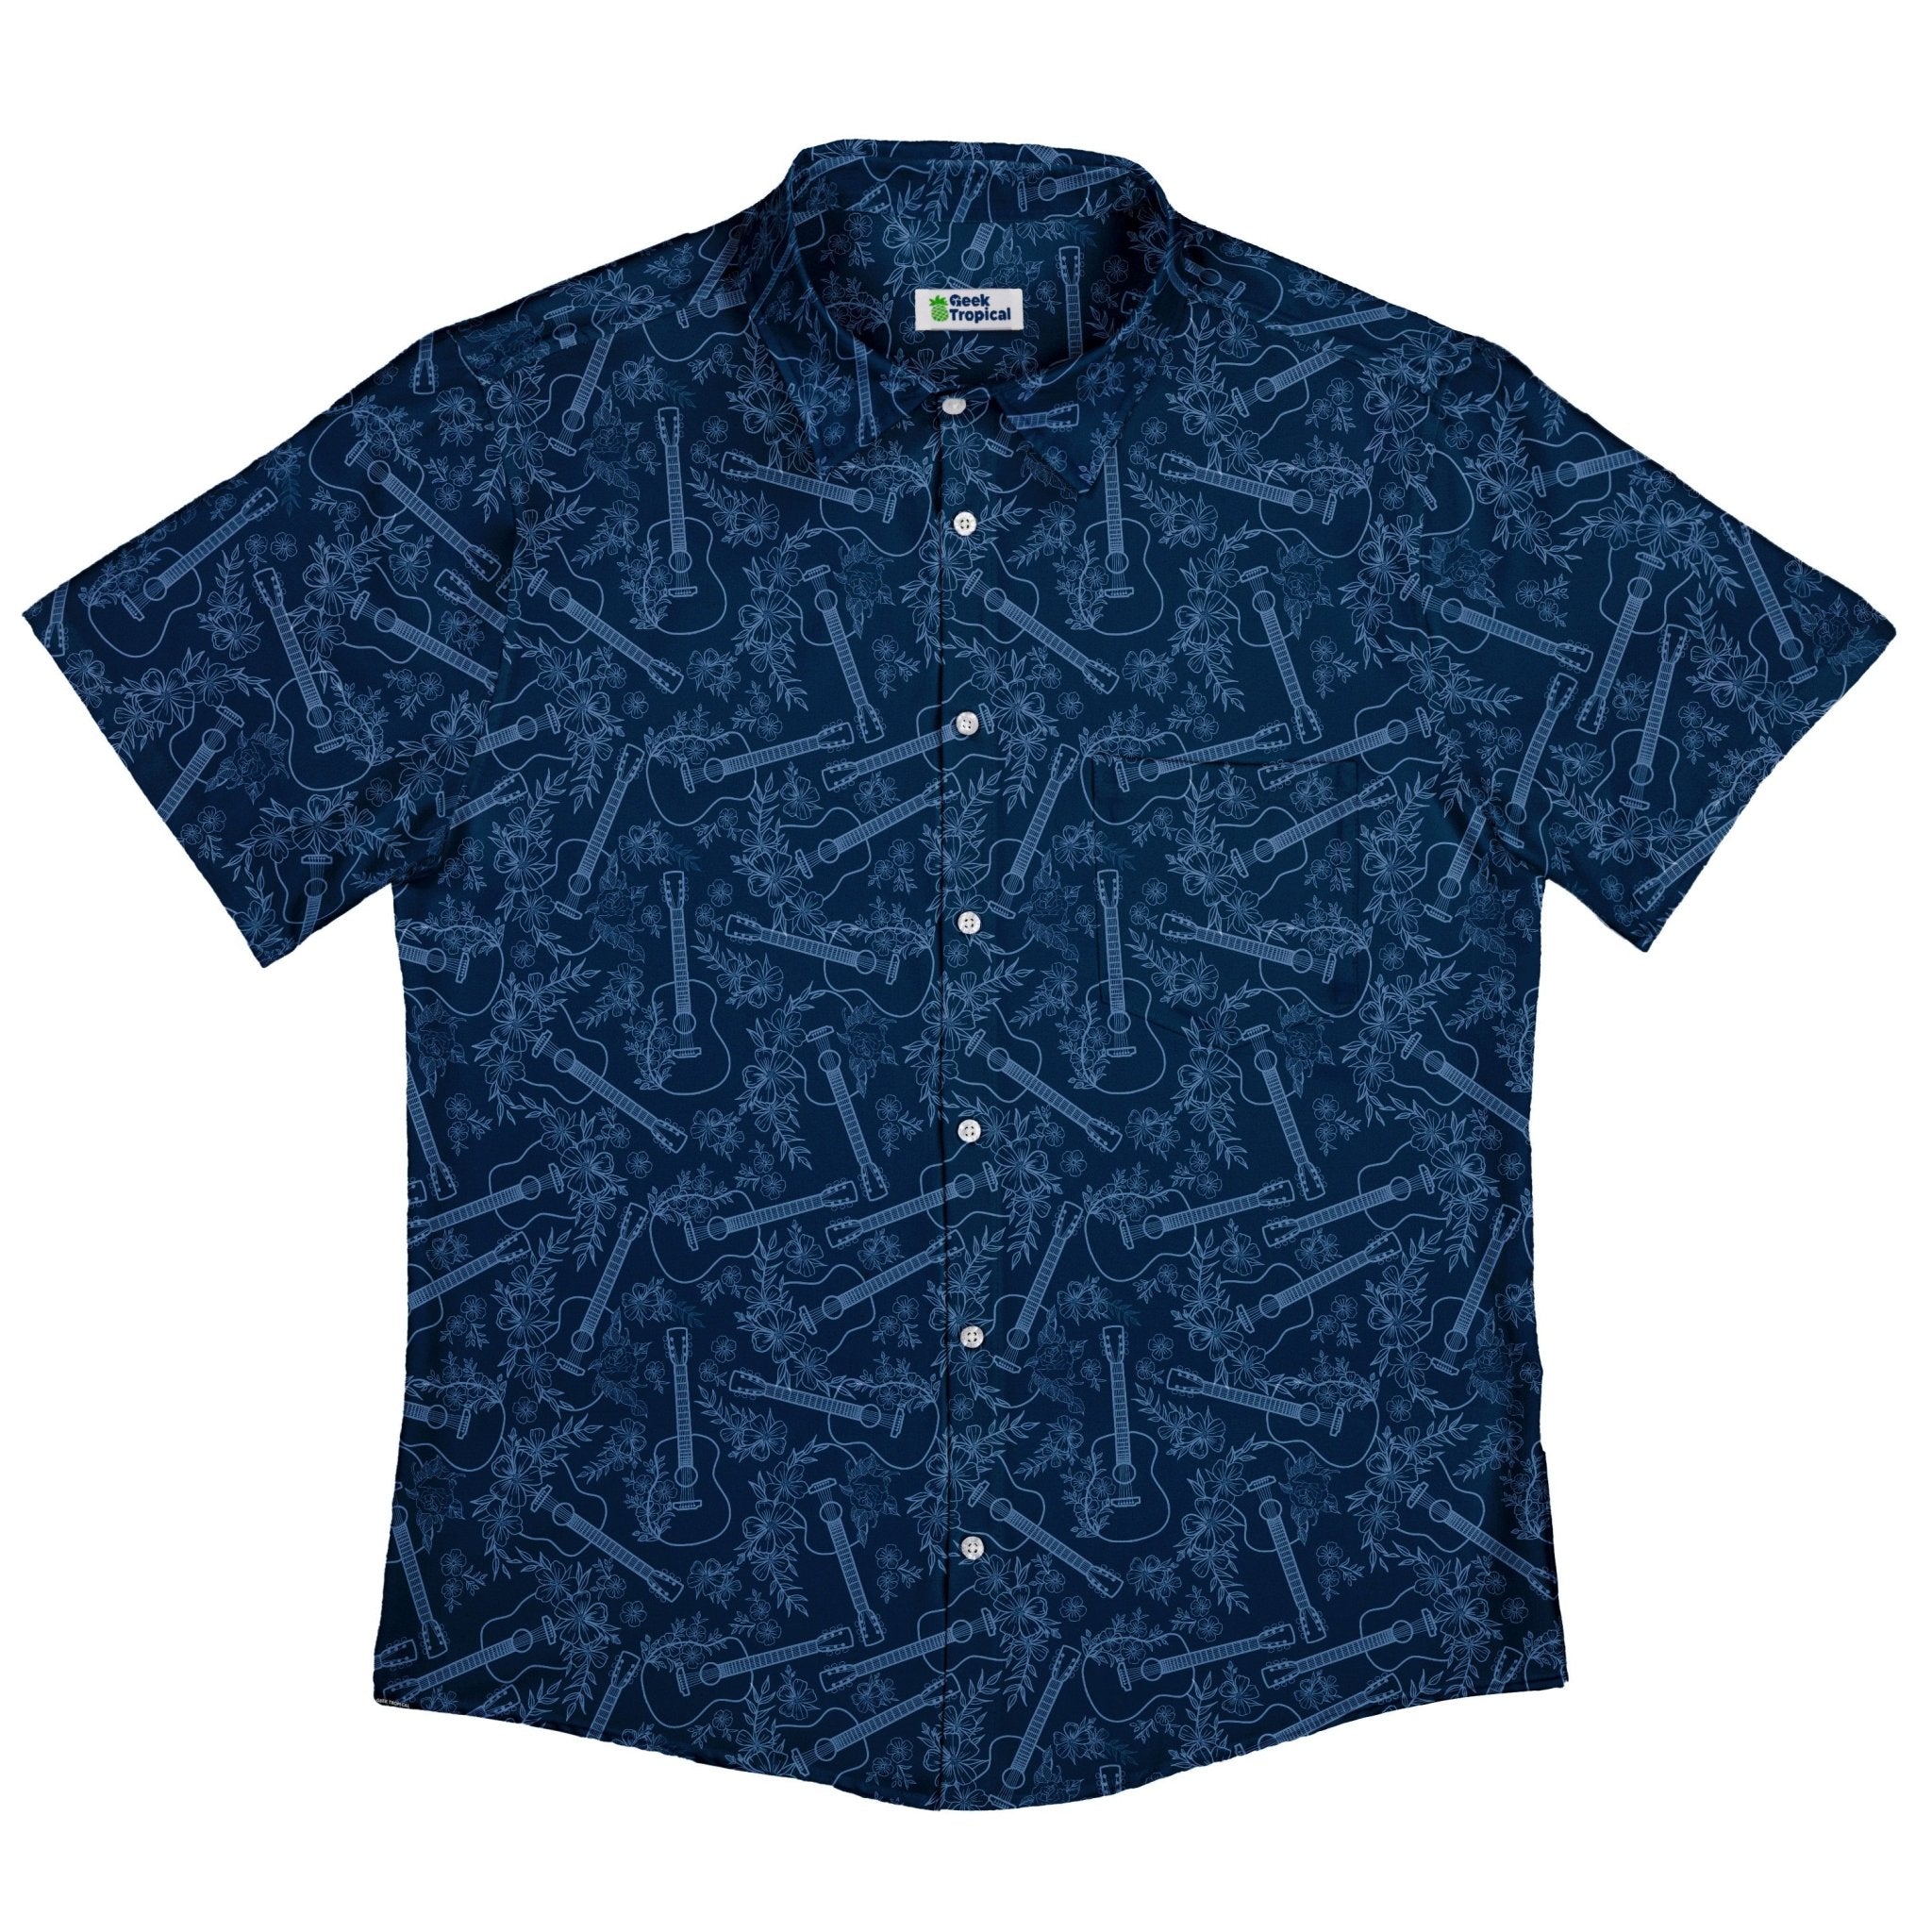 Guitar Blossoms Blue Button Up Shirt - adult sizing - Design by Dunking Toast - music print